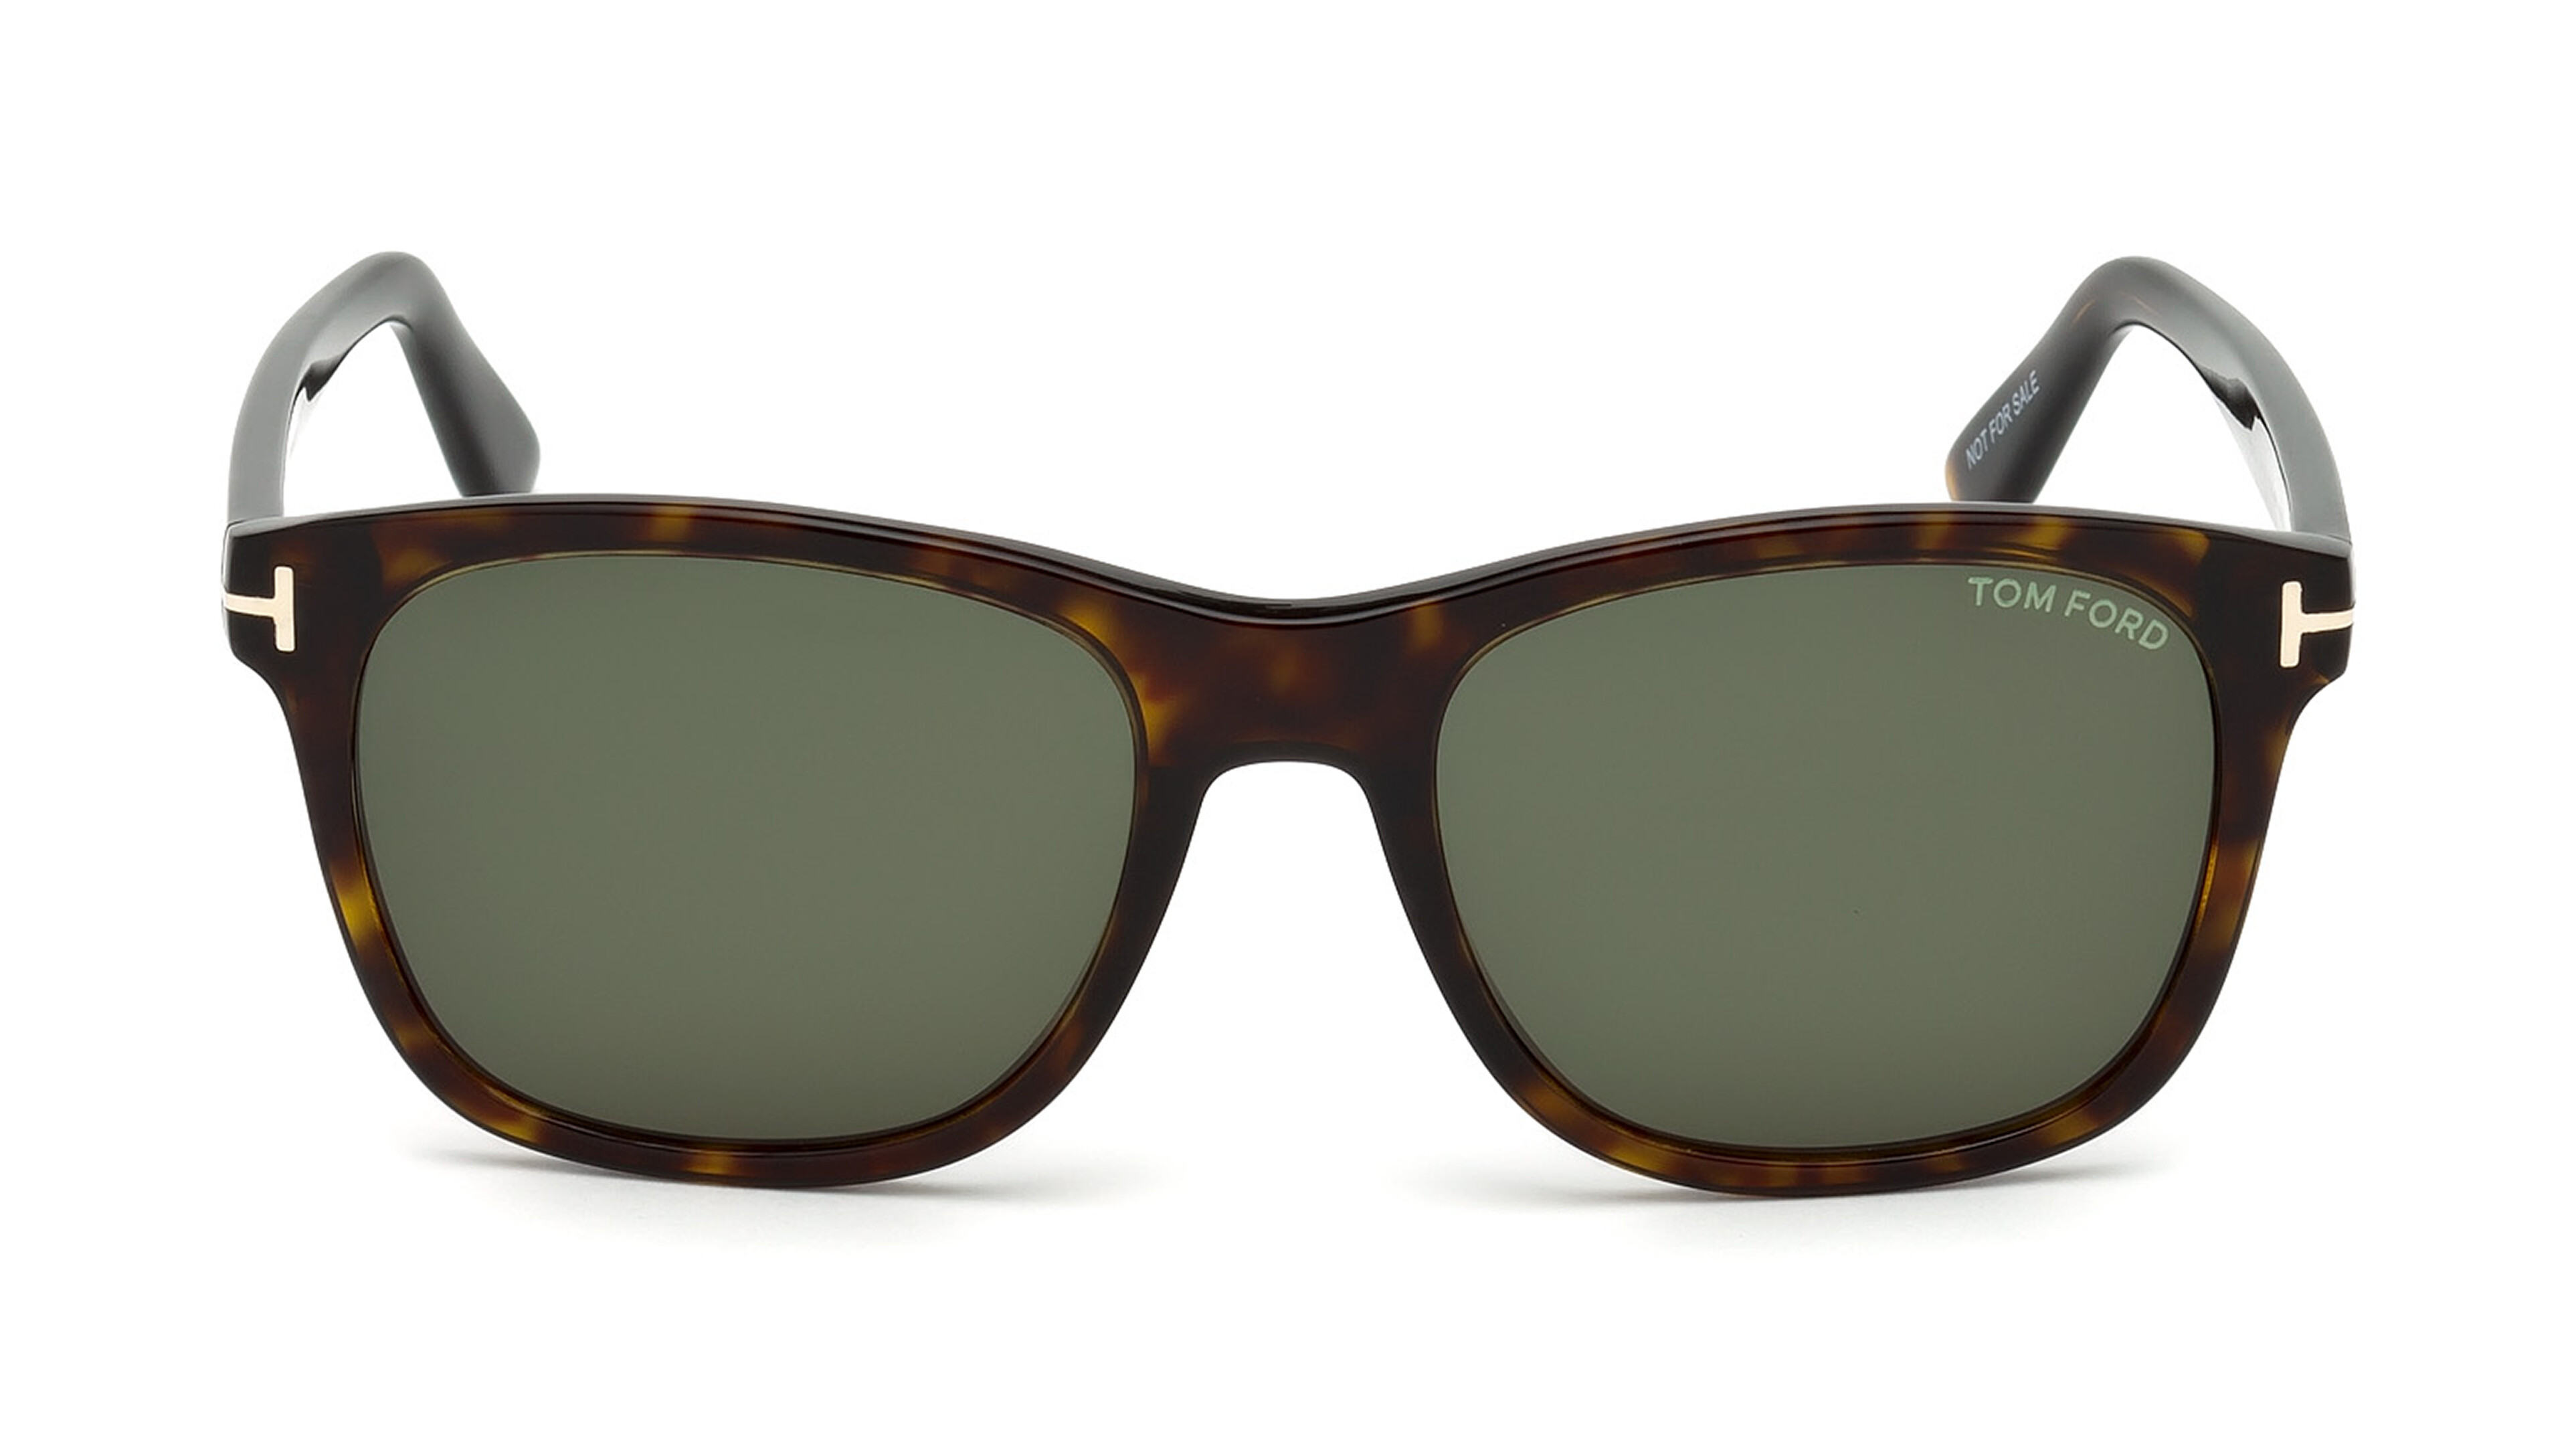 [products.image.front] Tom Ford FT0595 52N Sonnenbrille